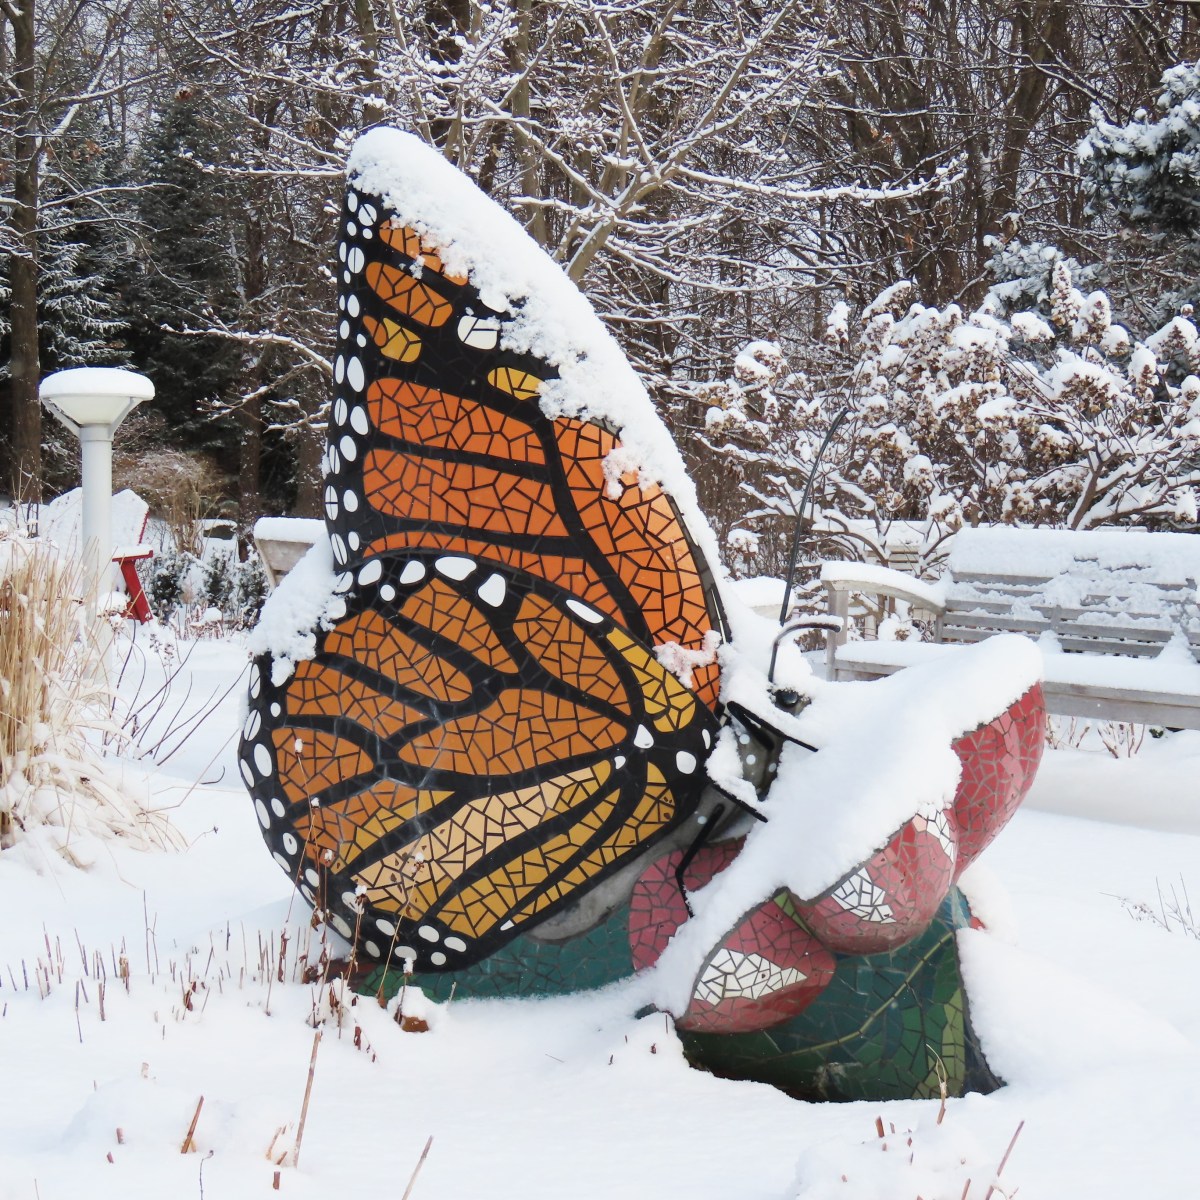 Snow-covered monarch butterfly statue in garden